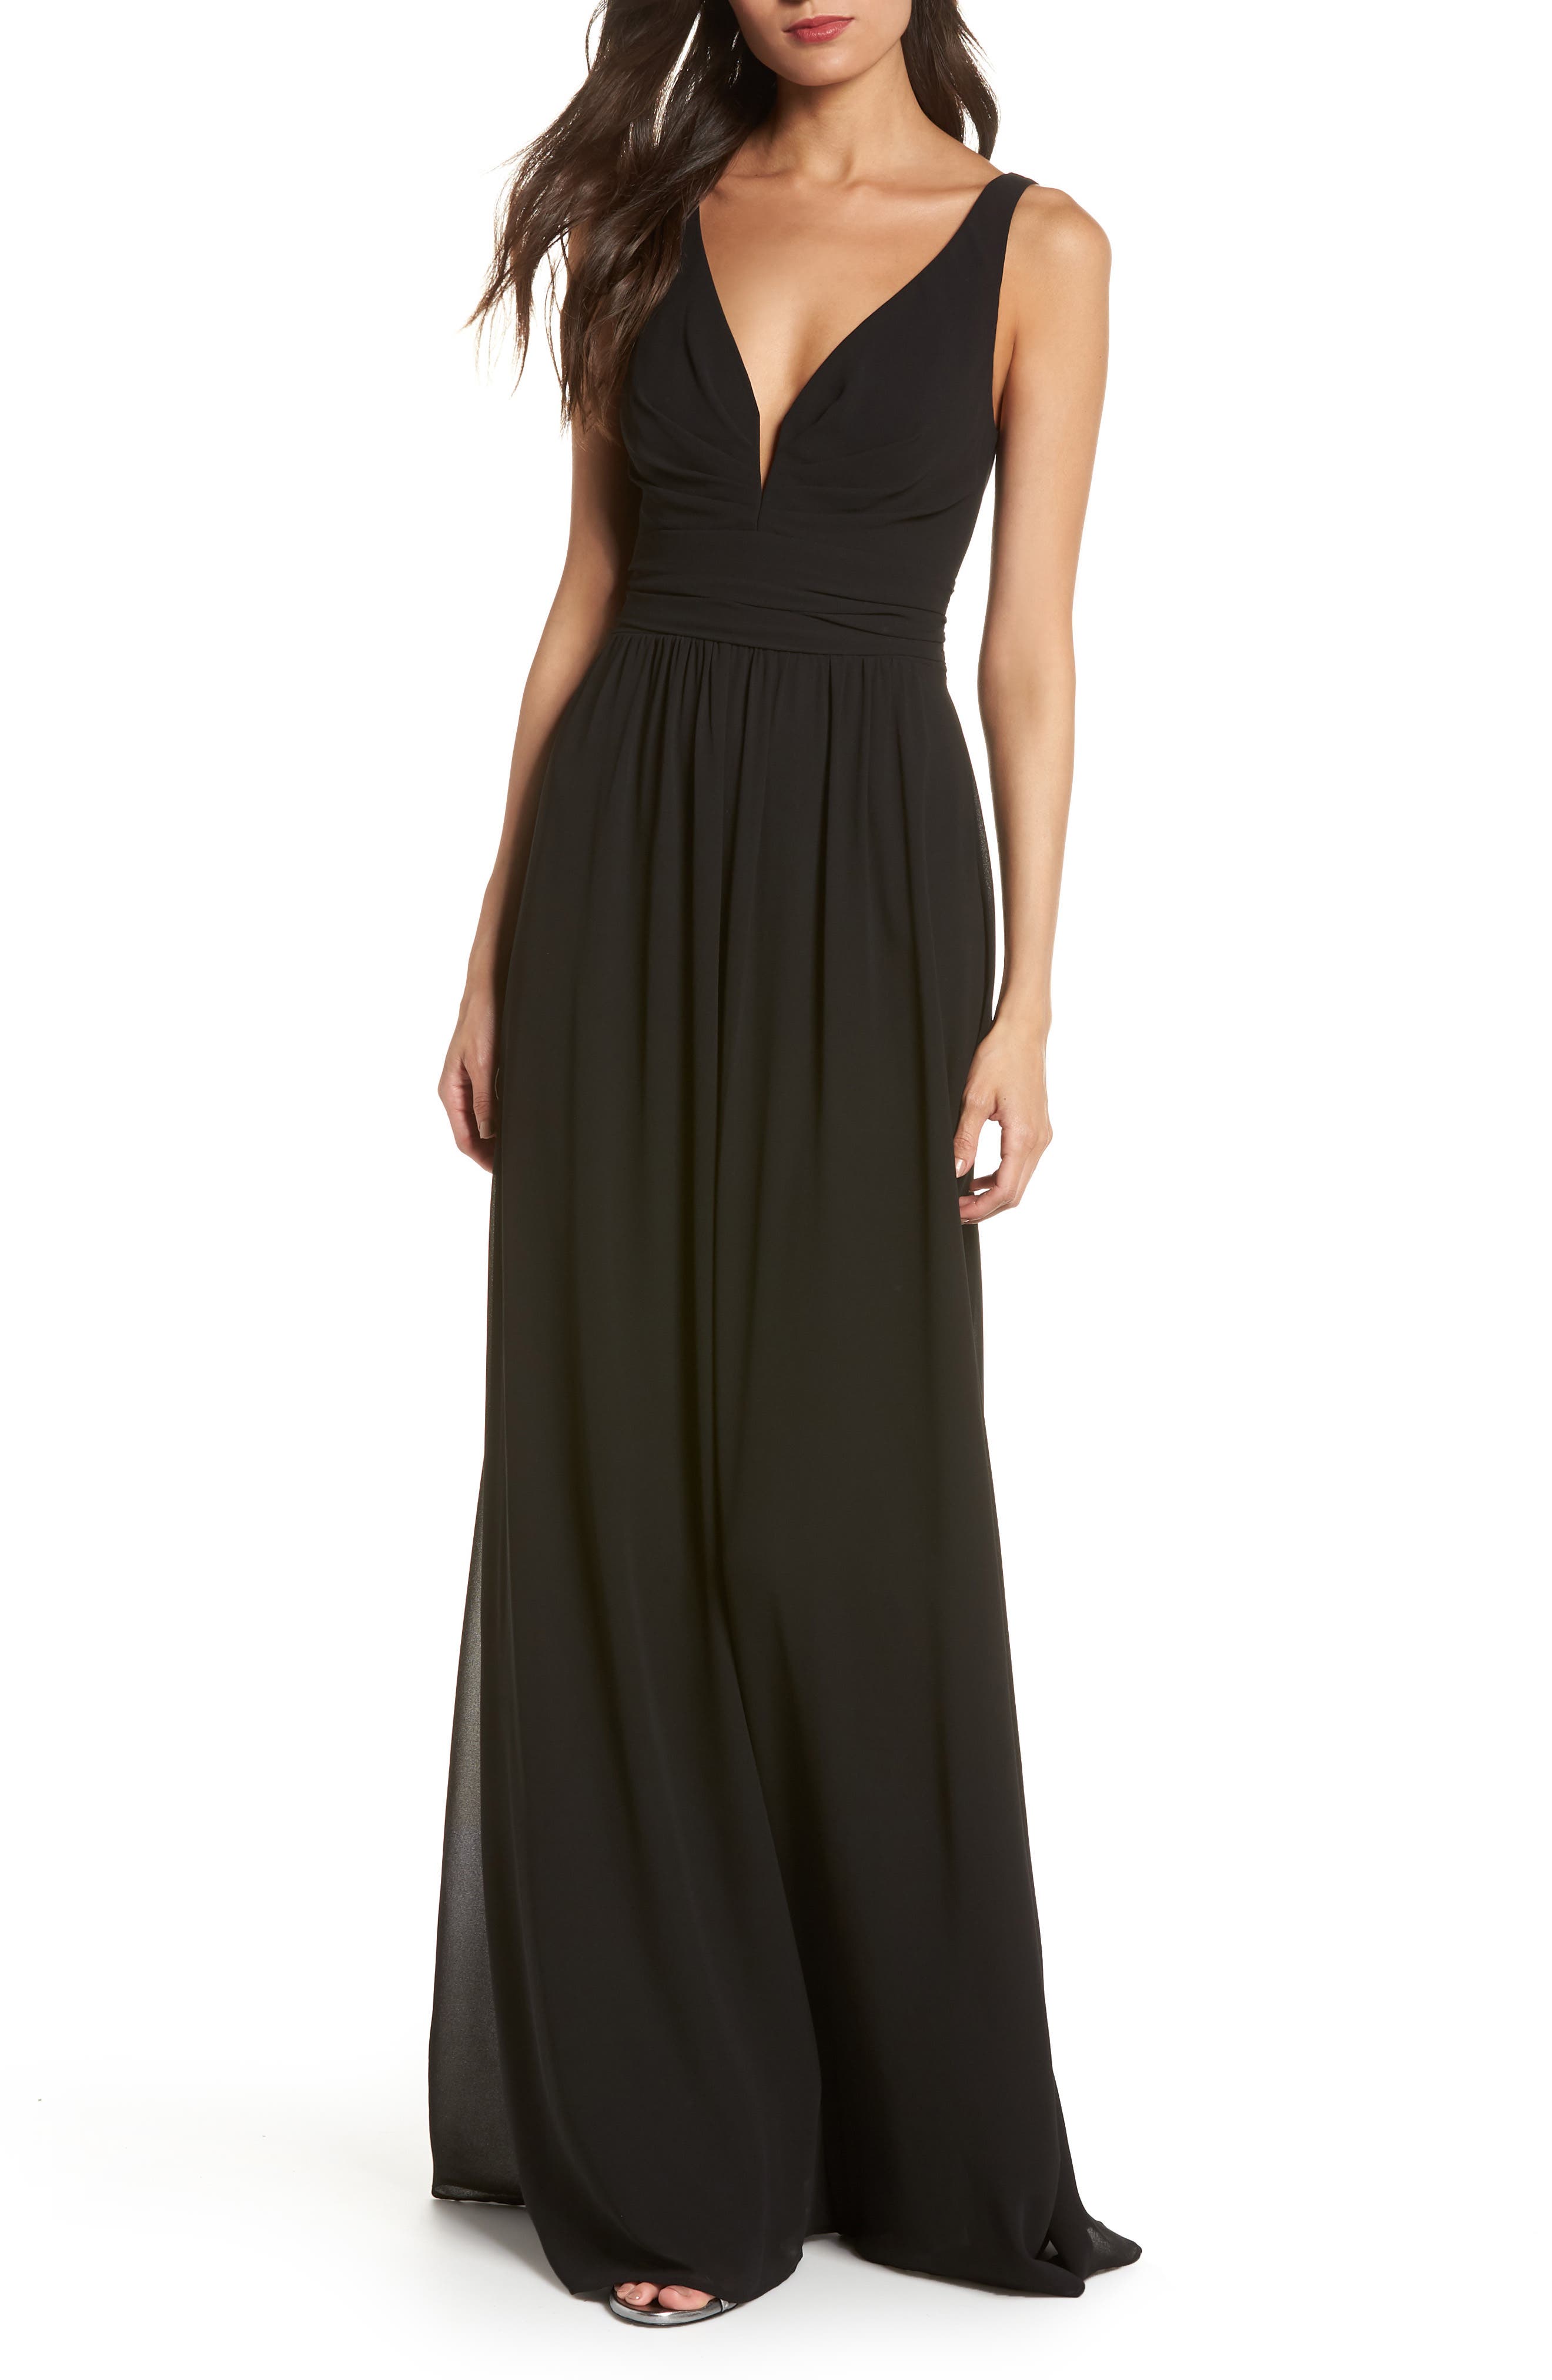 evening gown dress stores near me